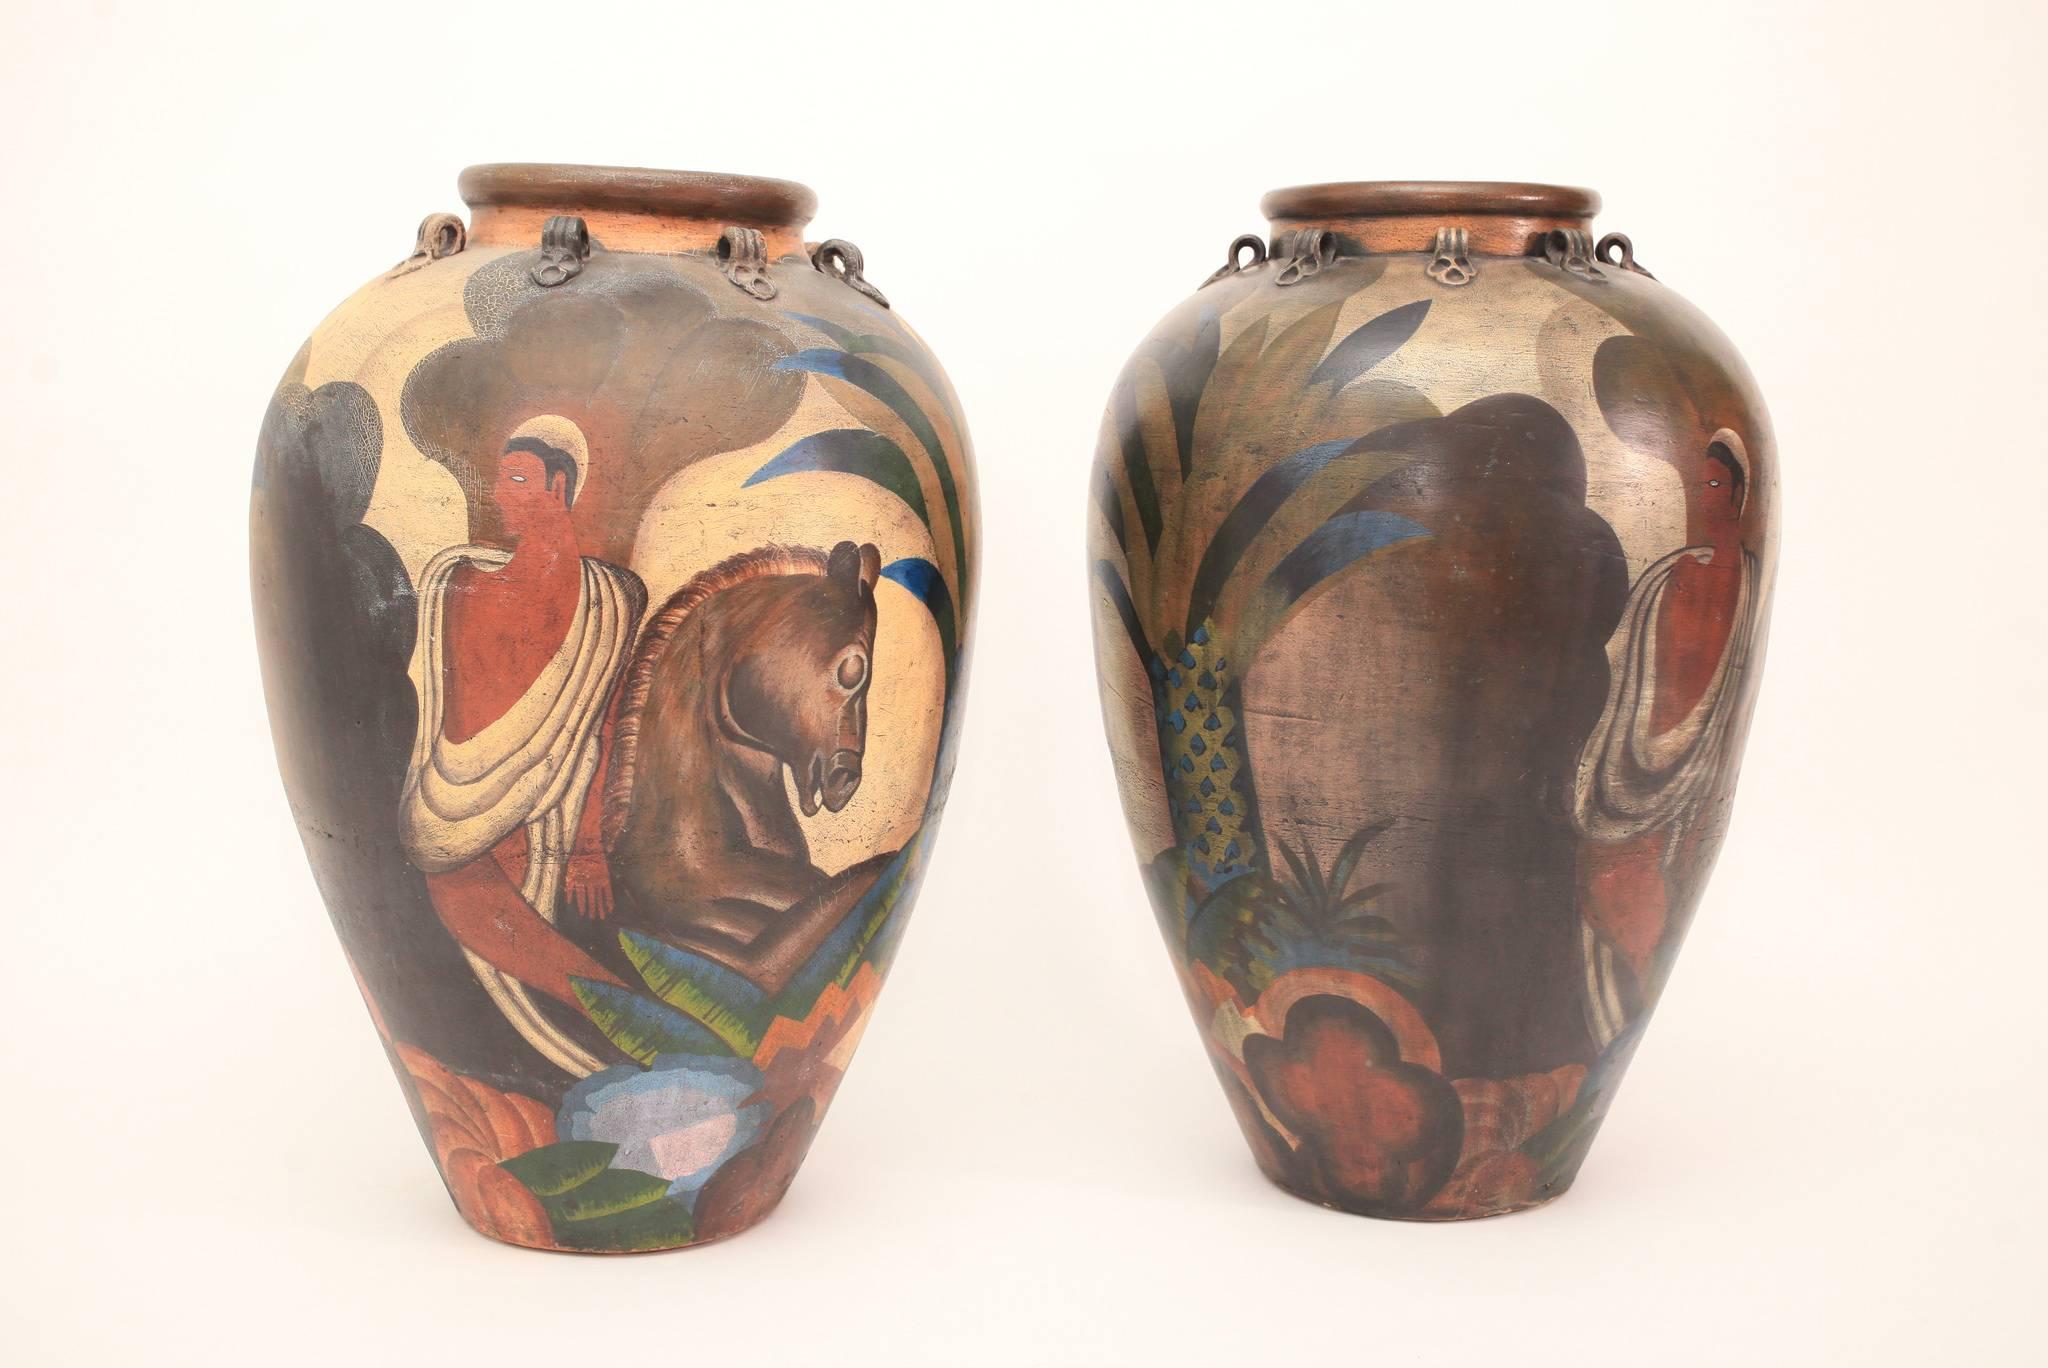 A tall pair of terracotta antique Mediterranean olive jars hand painted in the Deco style with a handsome male figure, horse and tropical foliage. Measures: 33.5